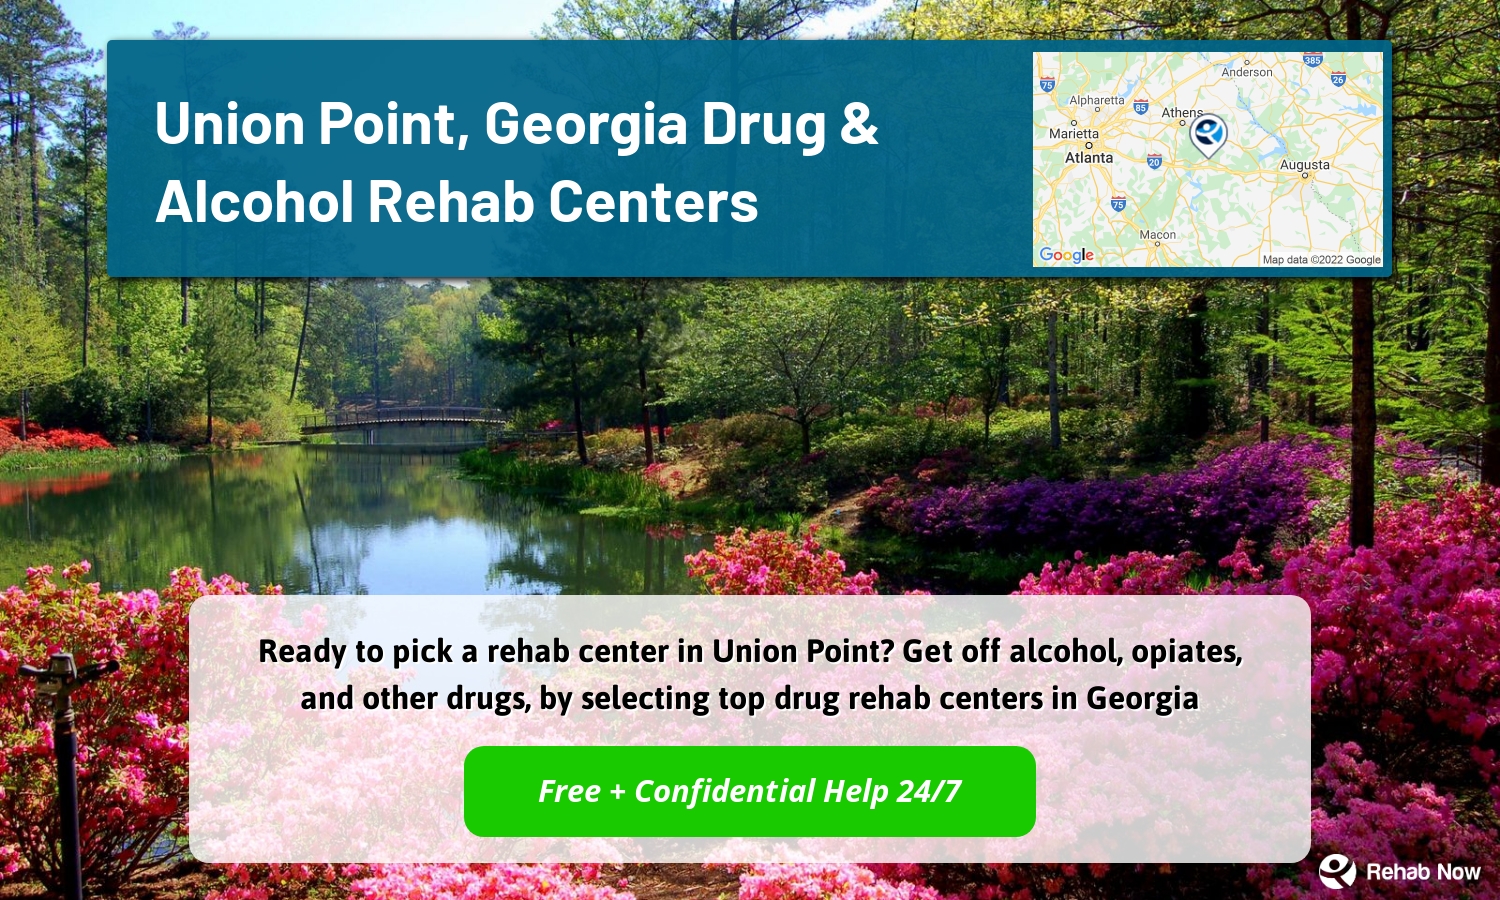 Ready to pick a rehab center in Union Point? Get off alcohol, opiates, and other drugs, by selecting top drug rehab centers in Georgia